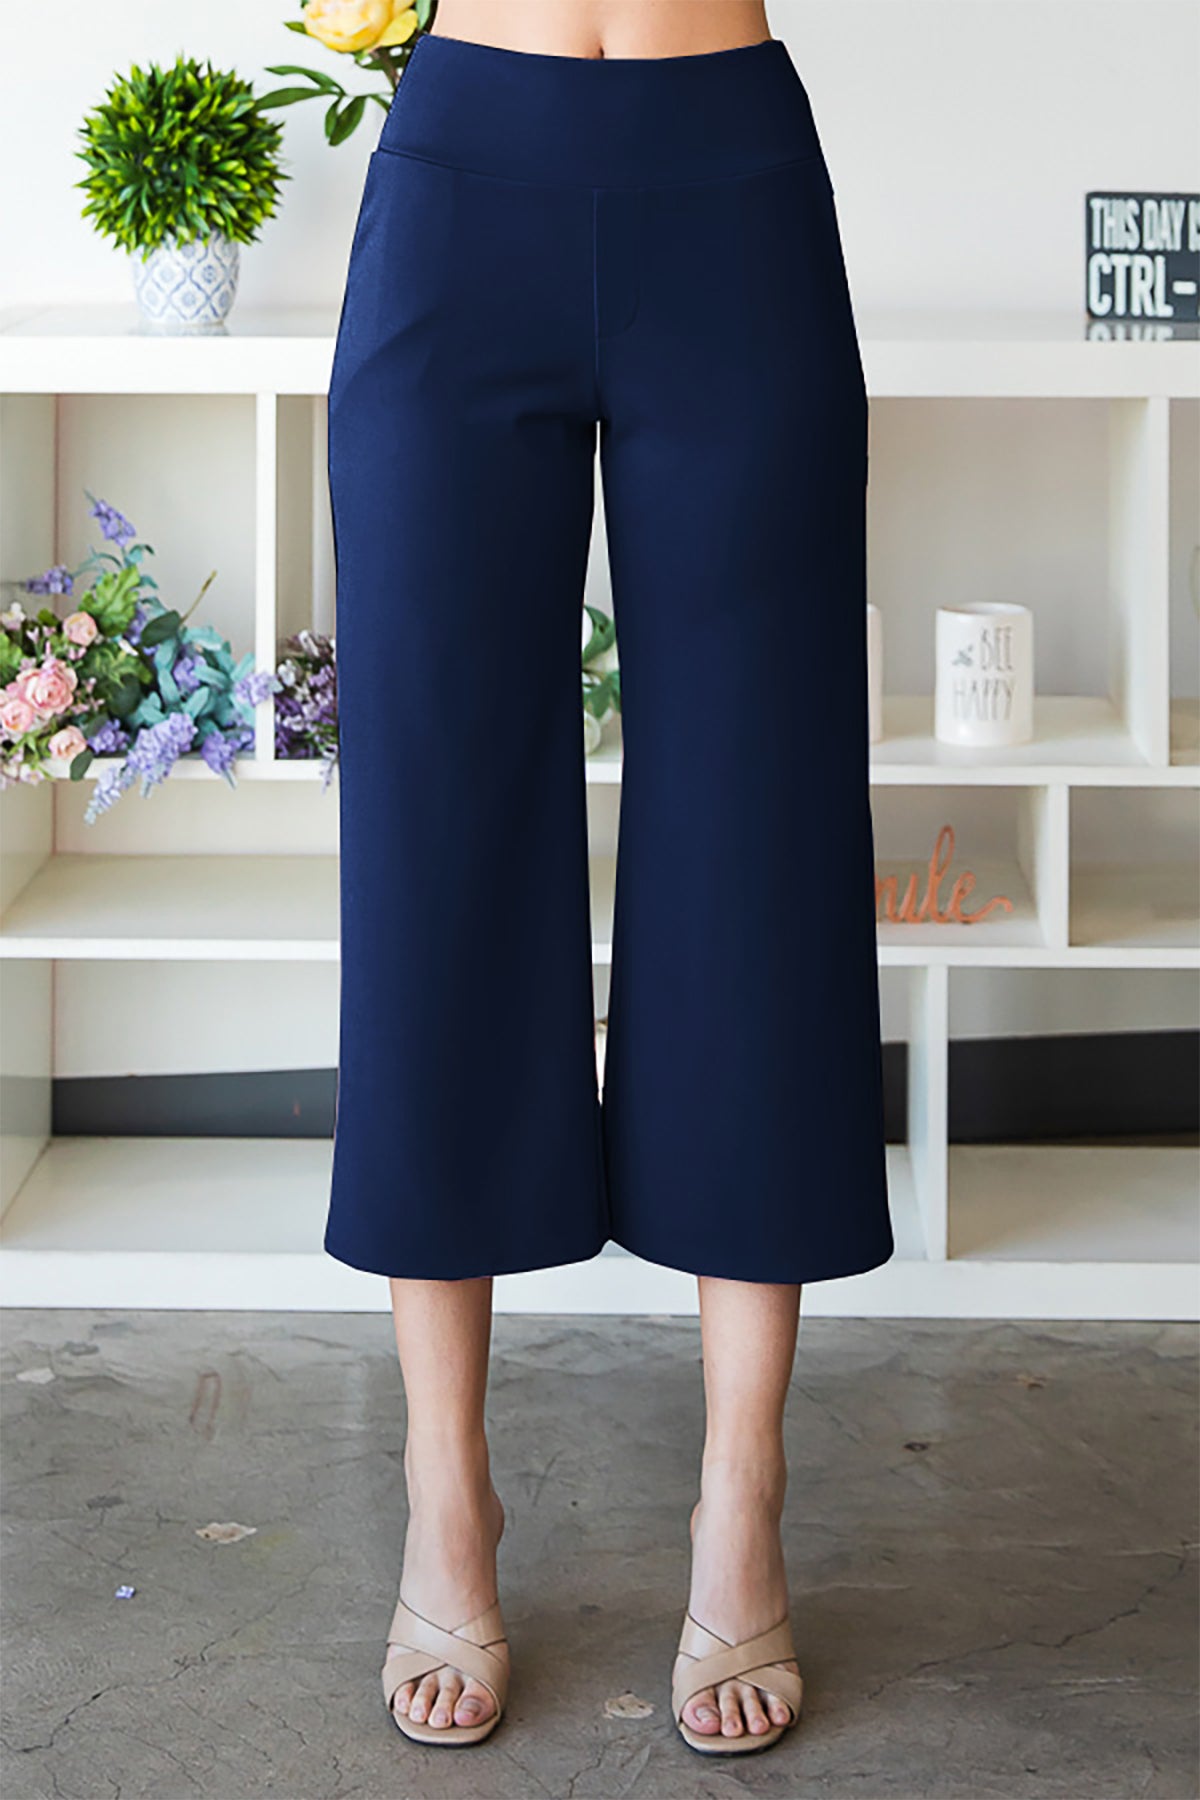 HM-EP6733-10 - WIDE WAISTBAND SOLID CULOTTES PANTS 2-2-2